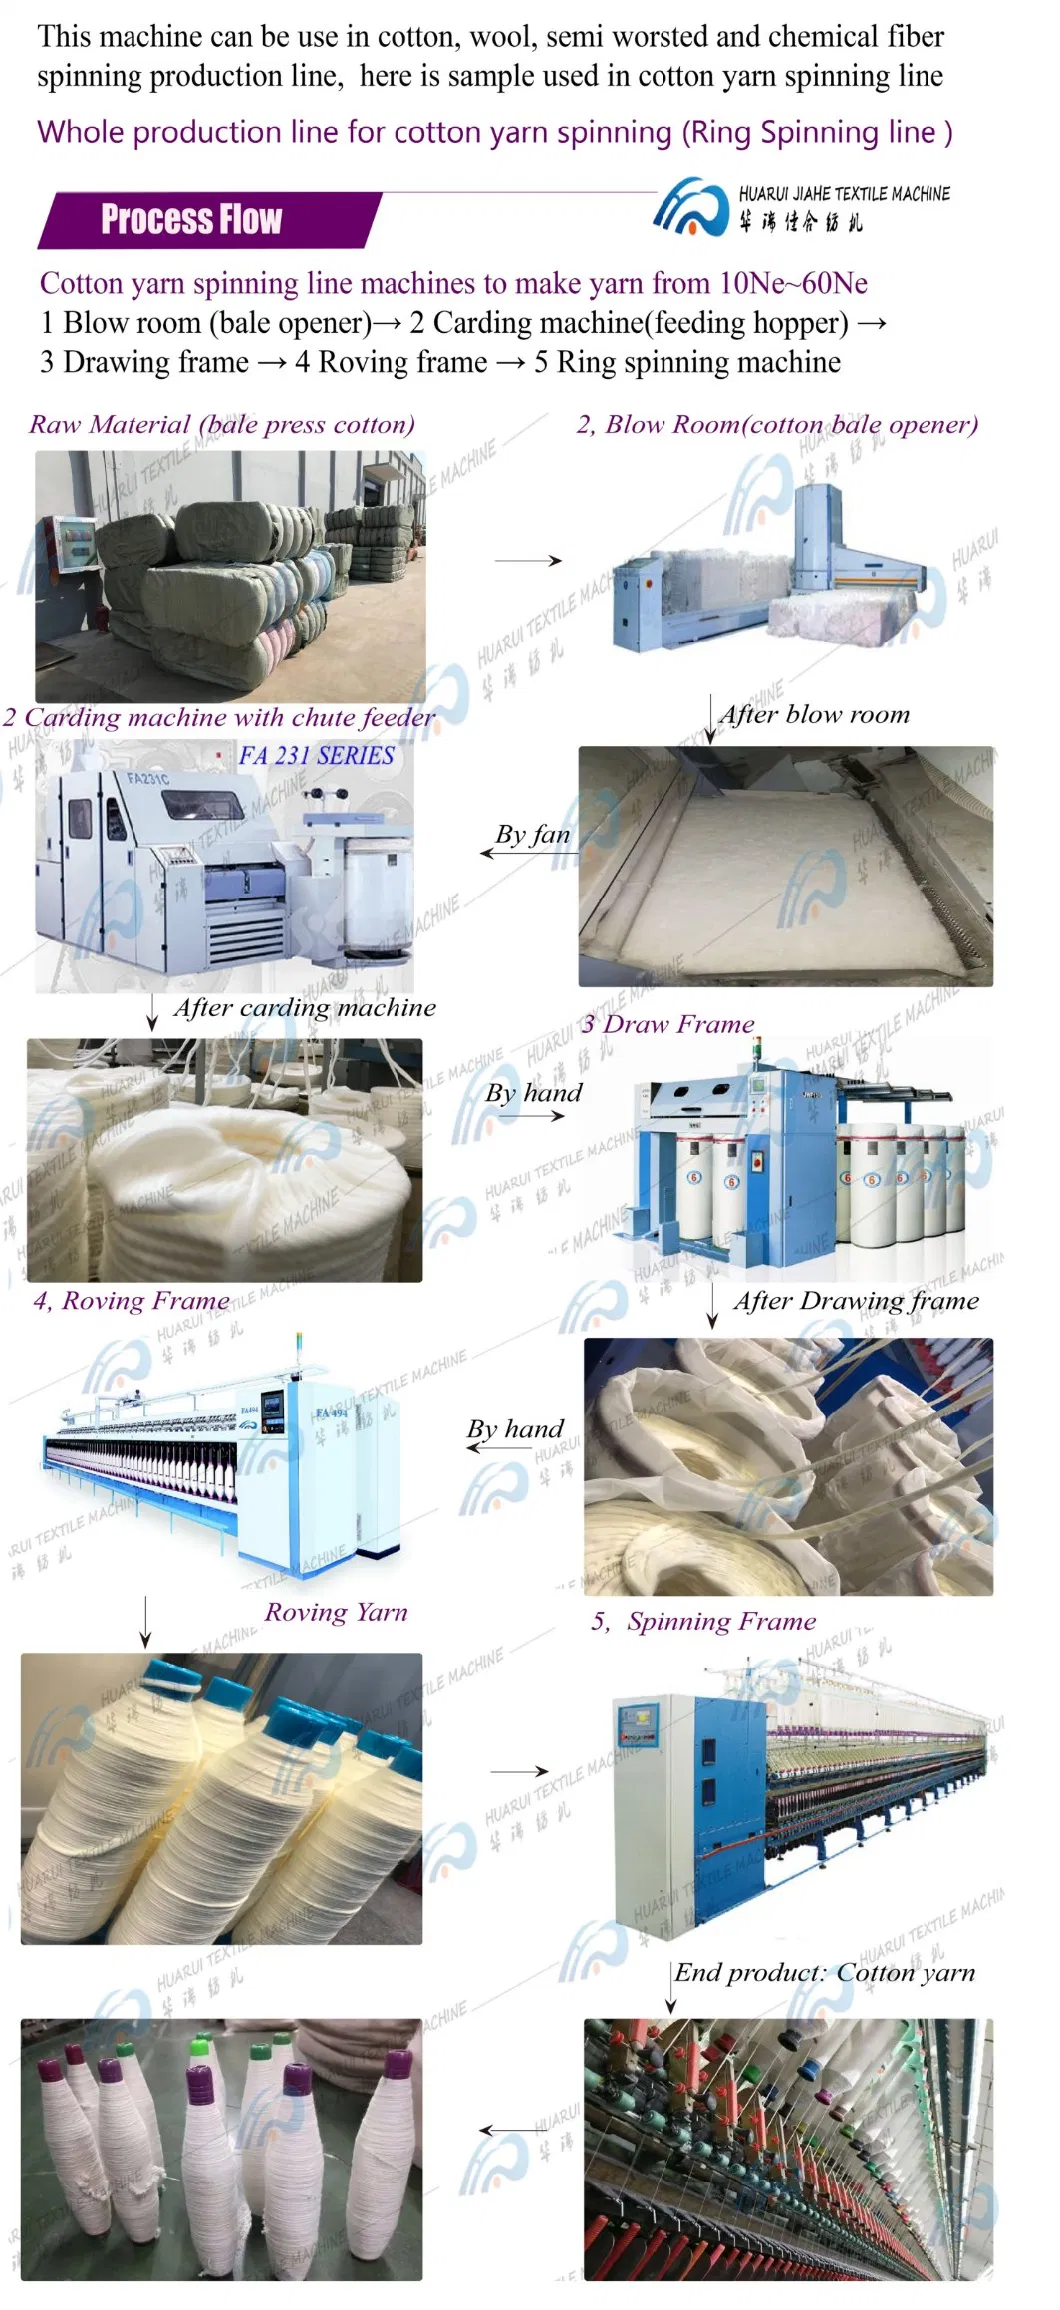 Beam Dye Machine Is for Desizing, Bleaching, Washing The Open-Width Textile Cloth as Well as Dyeing Open-Width Textile(Cotton&lt;50%=, Polyester, Blended Textile,